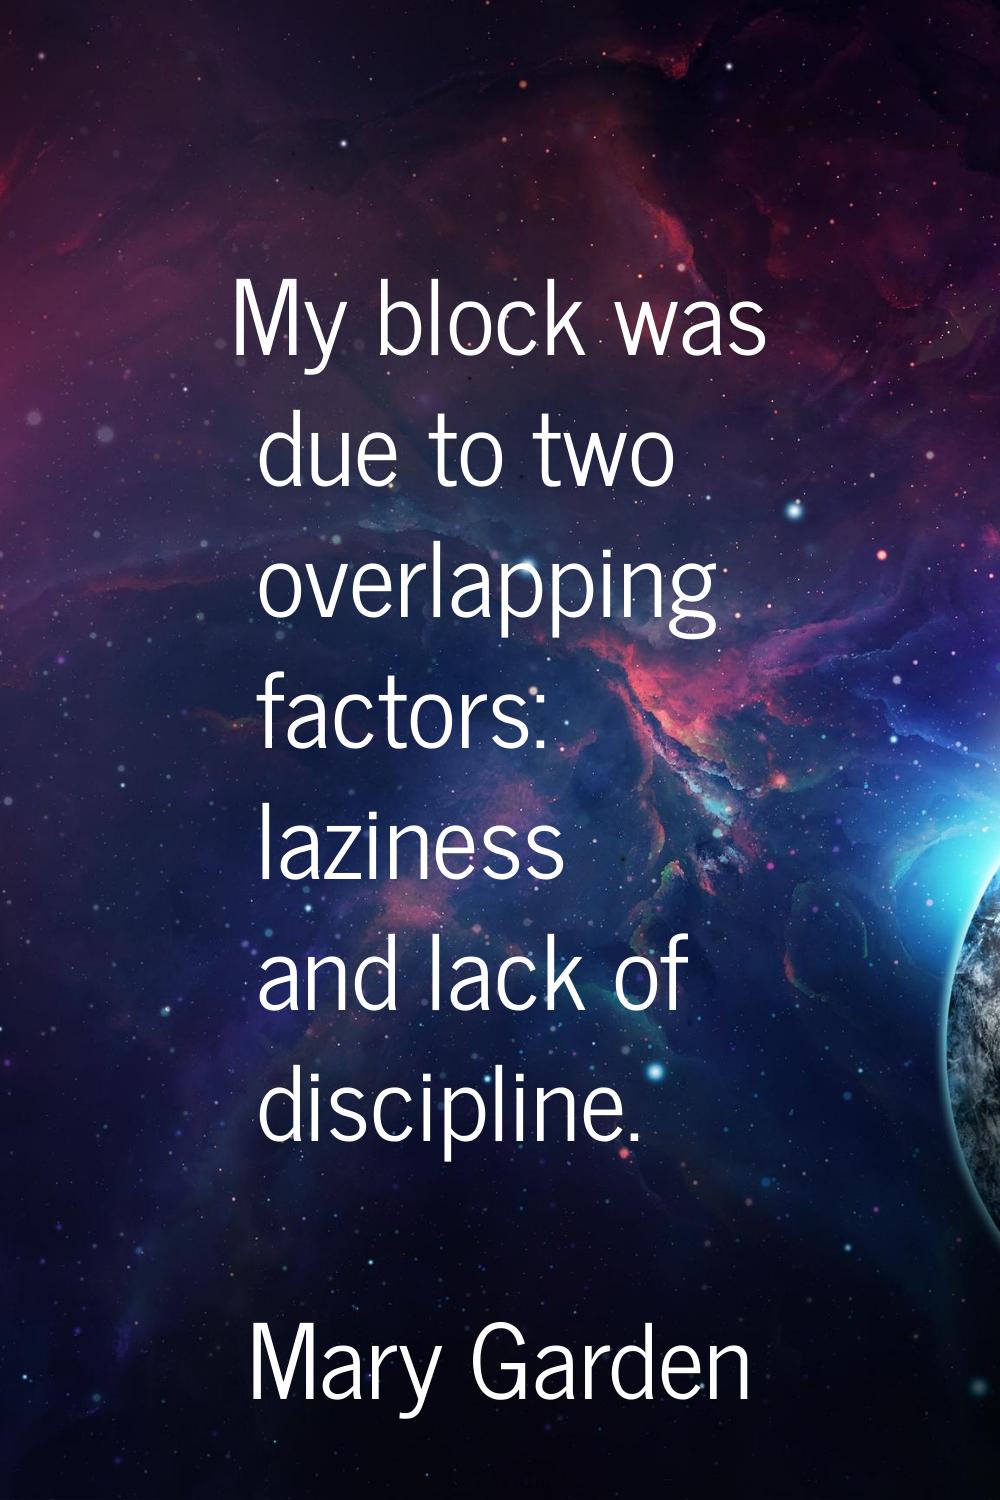 My block was due to two overlapping factors: laziness and lack of discipline.